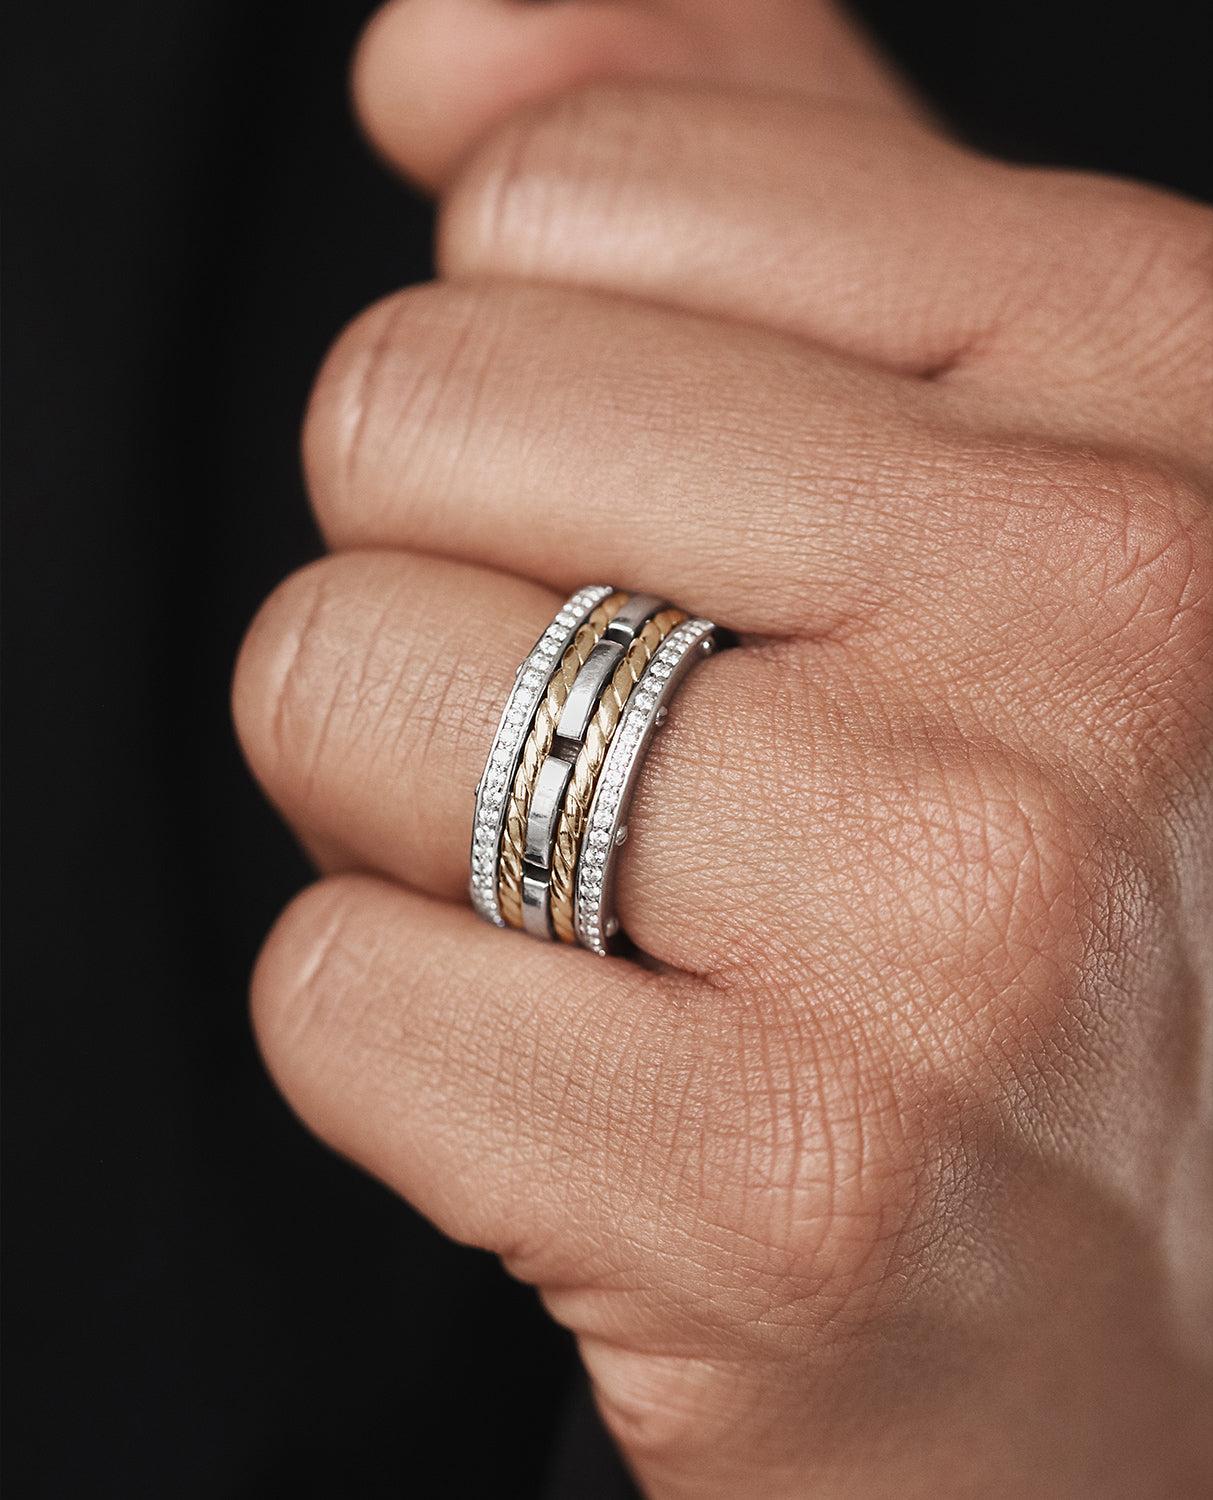 Three bold-looking two-tone rings, pave set with 1.05ct brilliant cut round white diamonds, connected by the signature exclusive Rockford screws with rope designs flowing in between the bands. Our ROPES ring has a very modern, striking look with a